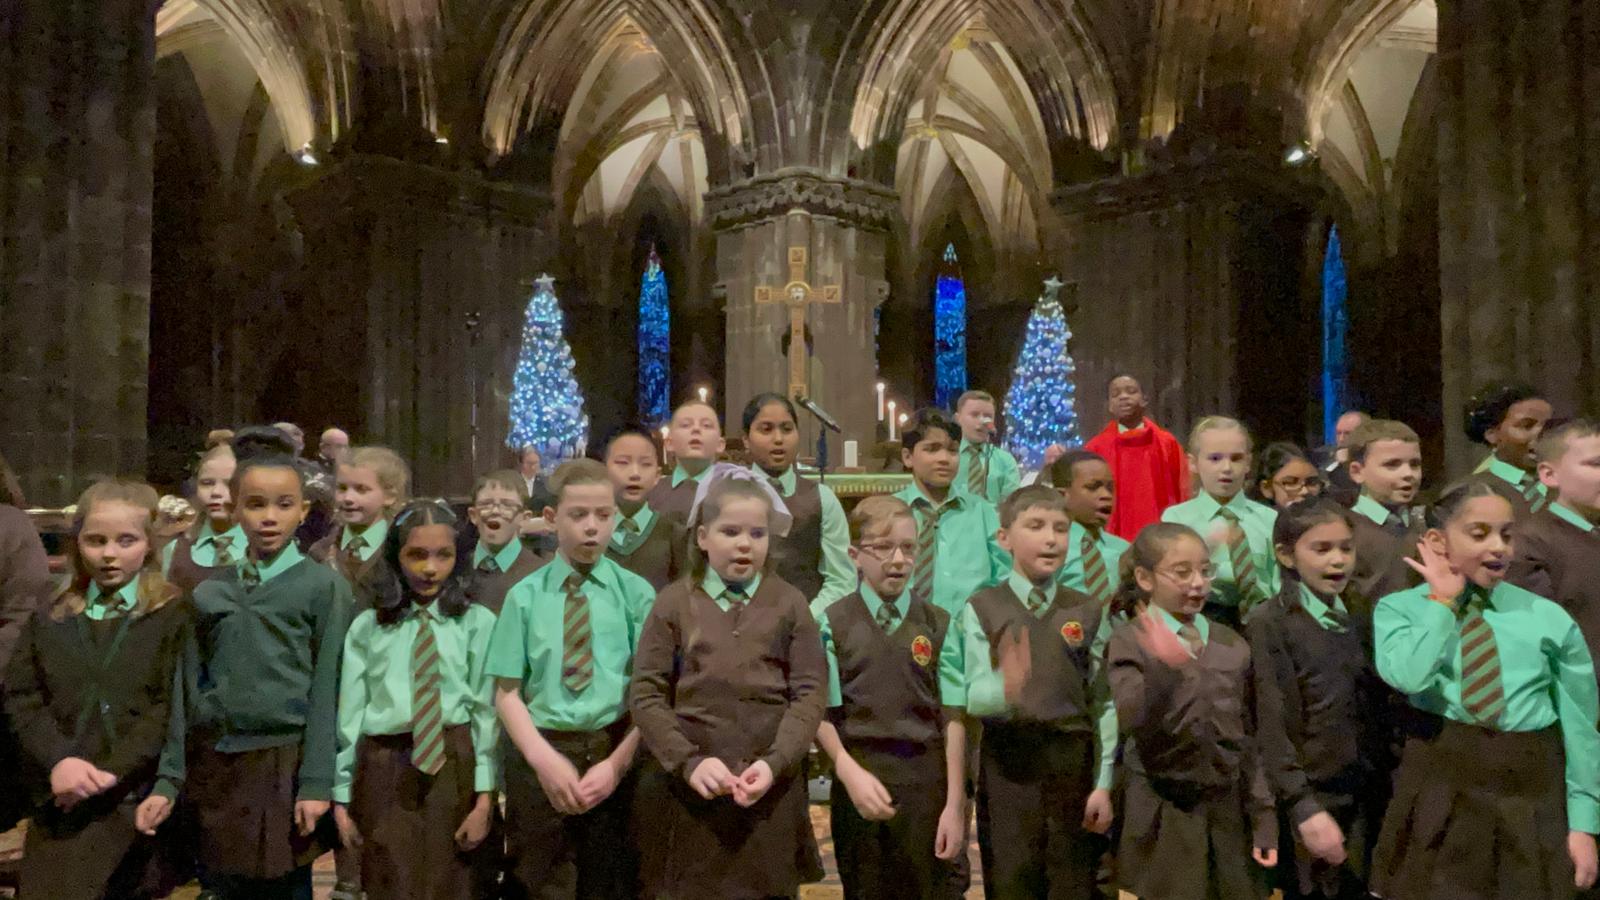 A photo of a children's choir standing in a historic building with pointed arches behind them. The children are singing and are wearing school uniform. The lighting is low.